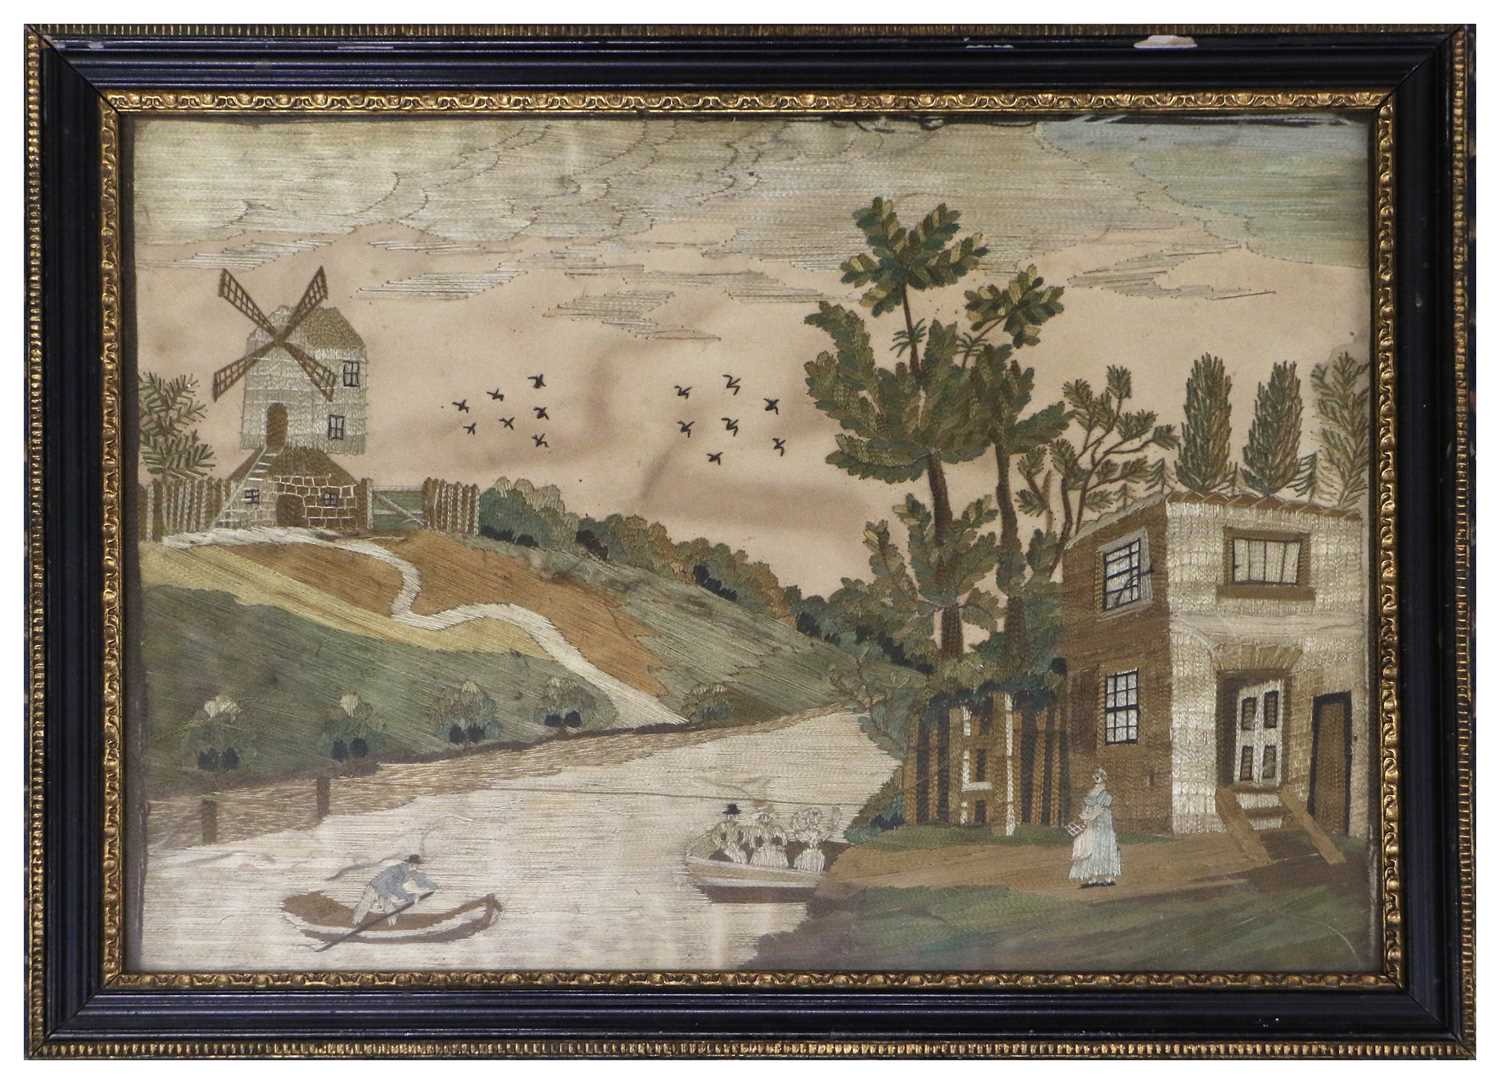 A Silkwork Picture, late 18th/early 19th century, depicting figres in boats on a river, a house